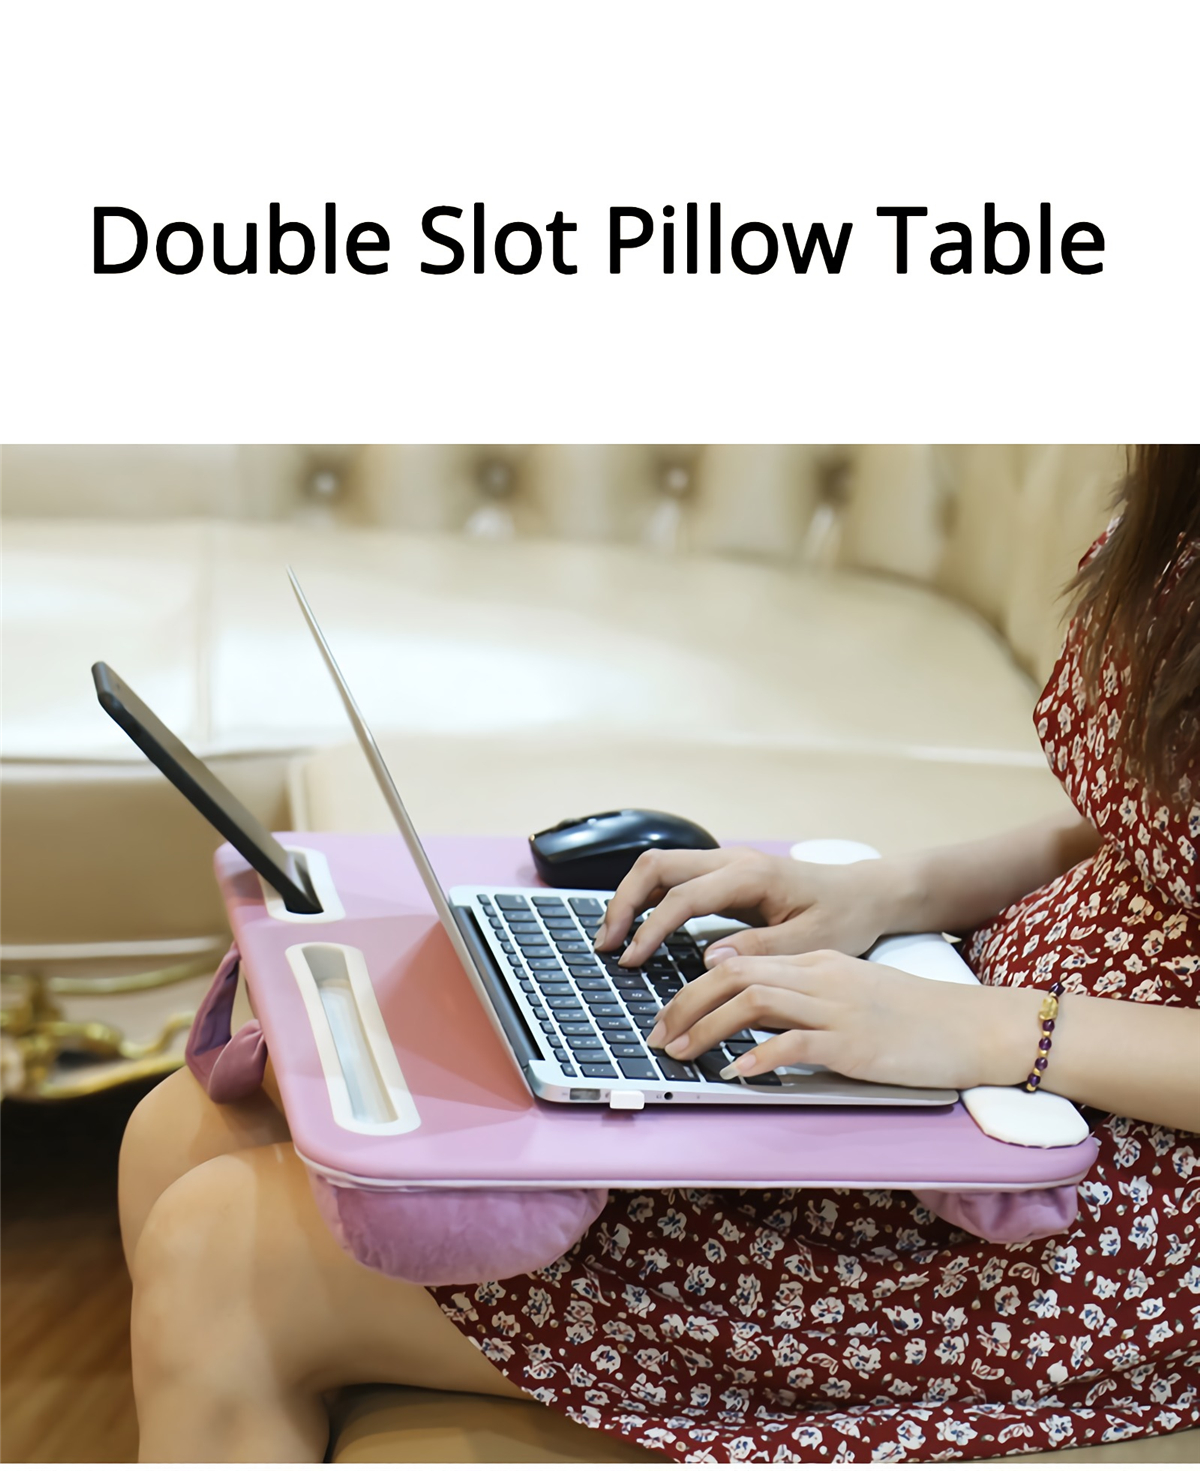 2-in-1-Double-Slot-Lap-Desk-Study-Pillow-Table-Computer-Laptop-Desk-Portable-Laptop-Stand-with-Phone-1888921-1